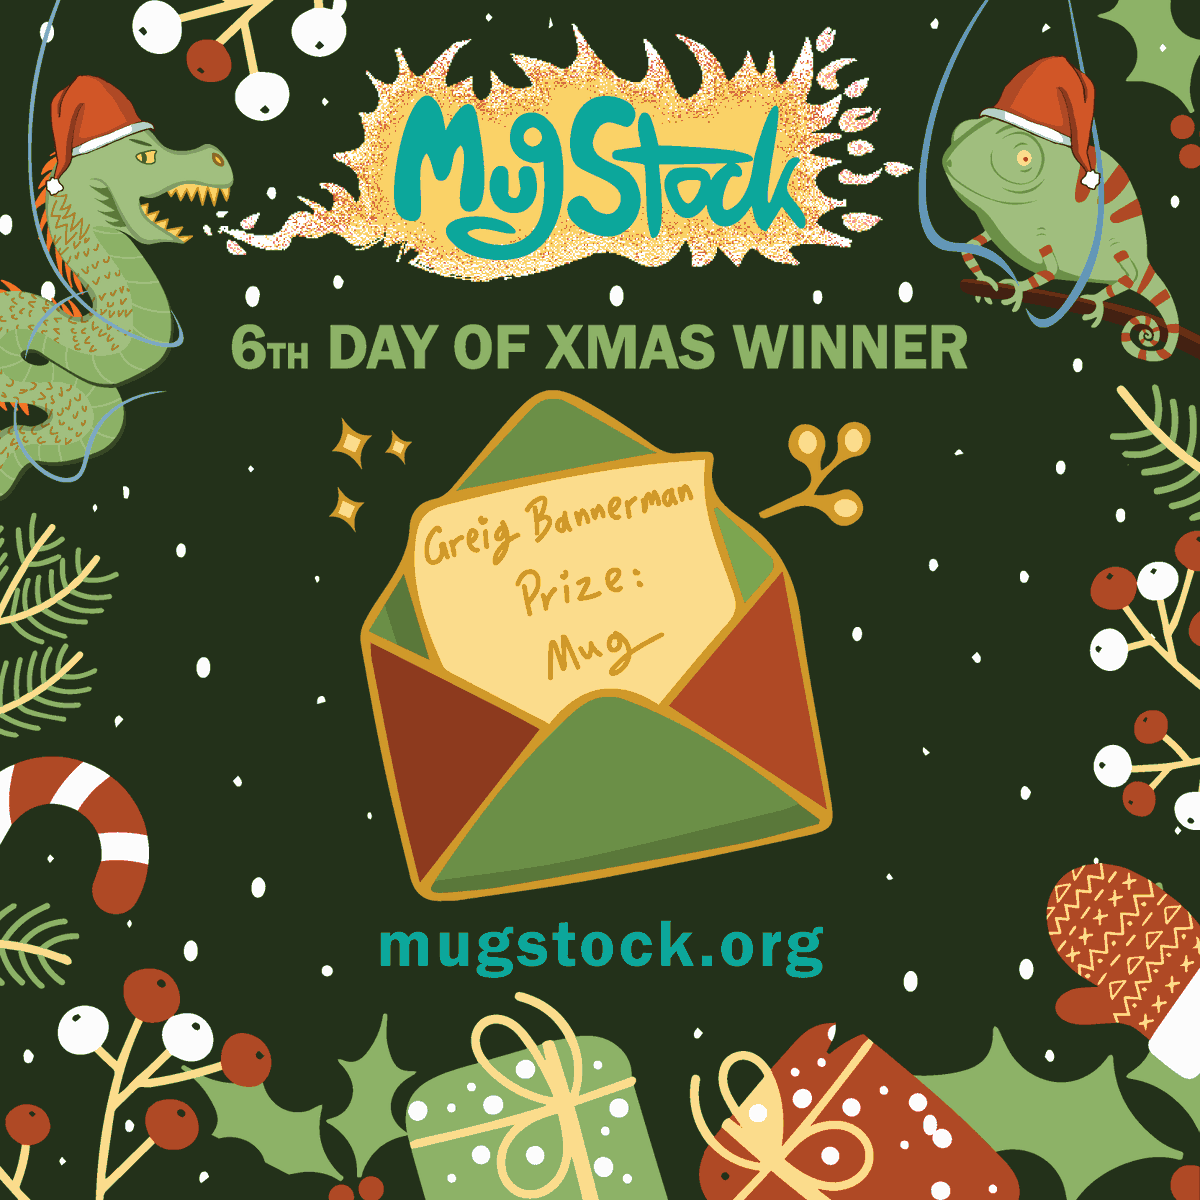 Congratulations to the 6th winner of our 12 Days of Christmas Giveaway! 🎉 There's still 6 gifts up for grabs: 🎁 2 x MugStock Hoodies 2 x MugStock T-Shirts 1 x MugStock Mugs 1 x Pair of Adult Weekend Tickets So get your tickets to be entered 🎟️ mugstock.org/tickets/